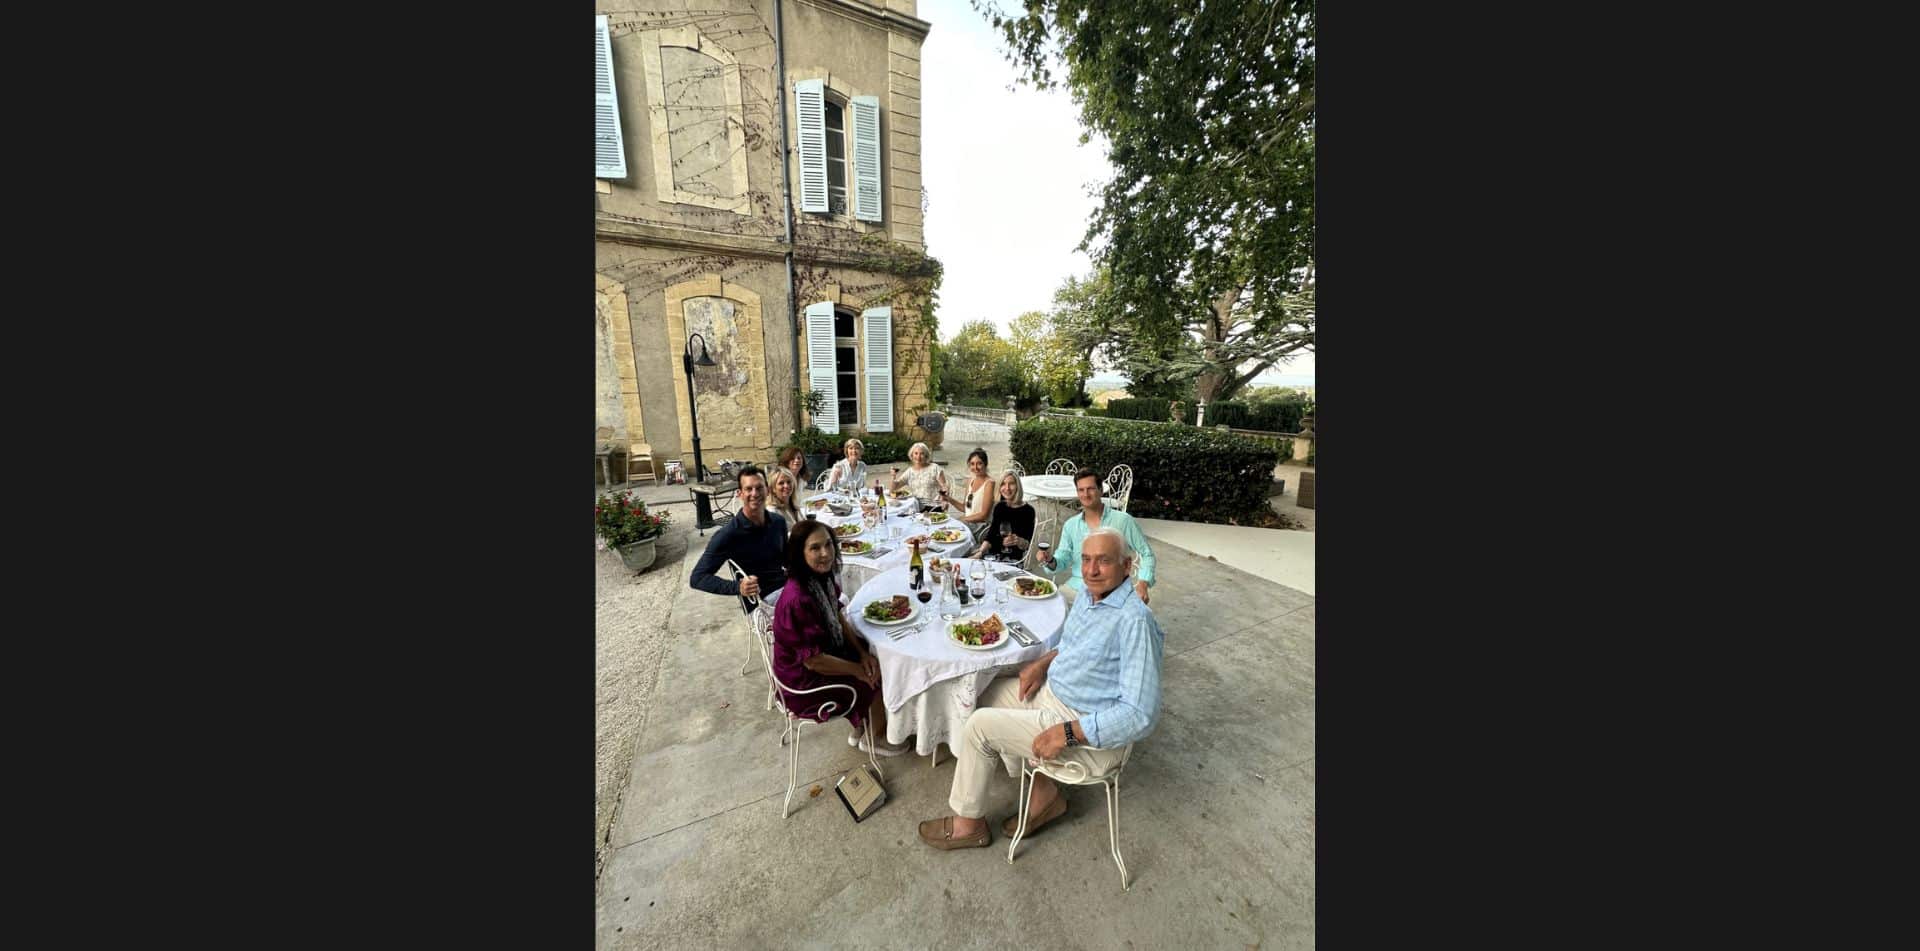 2 - Savor a private dinner of fine local specialties at your chateaux